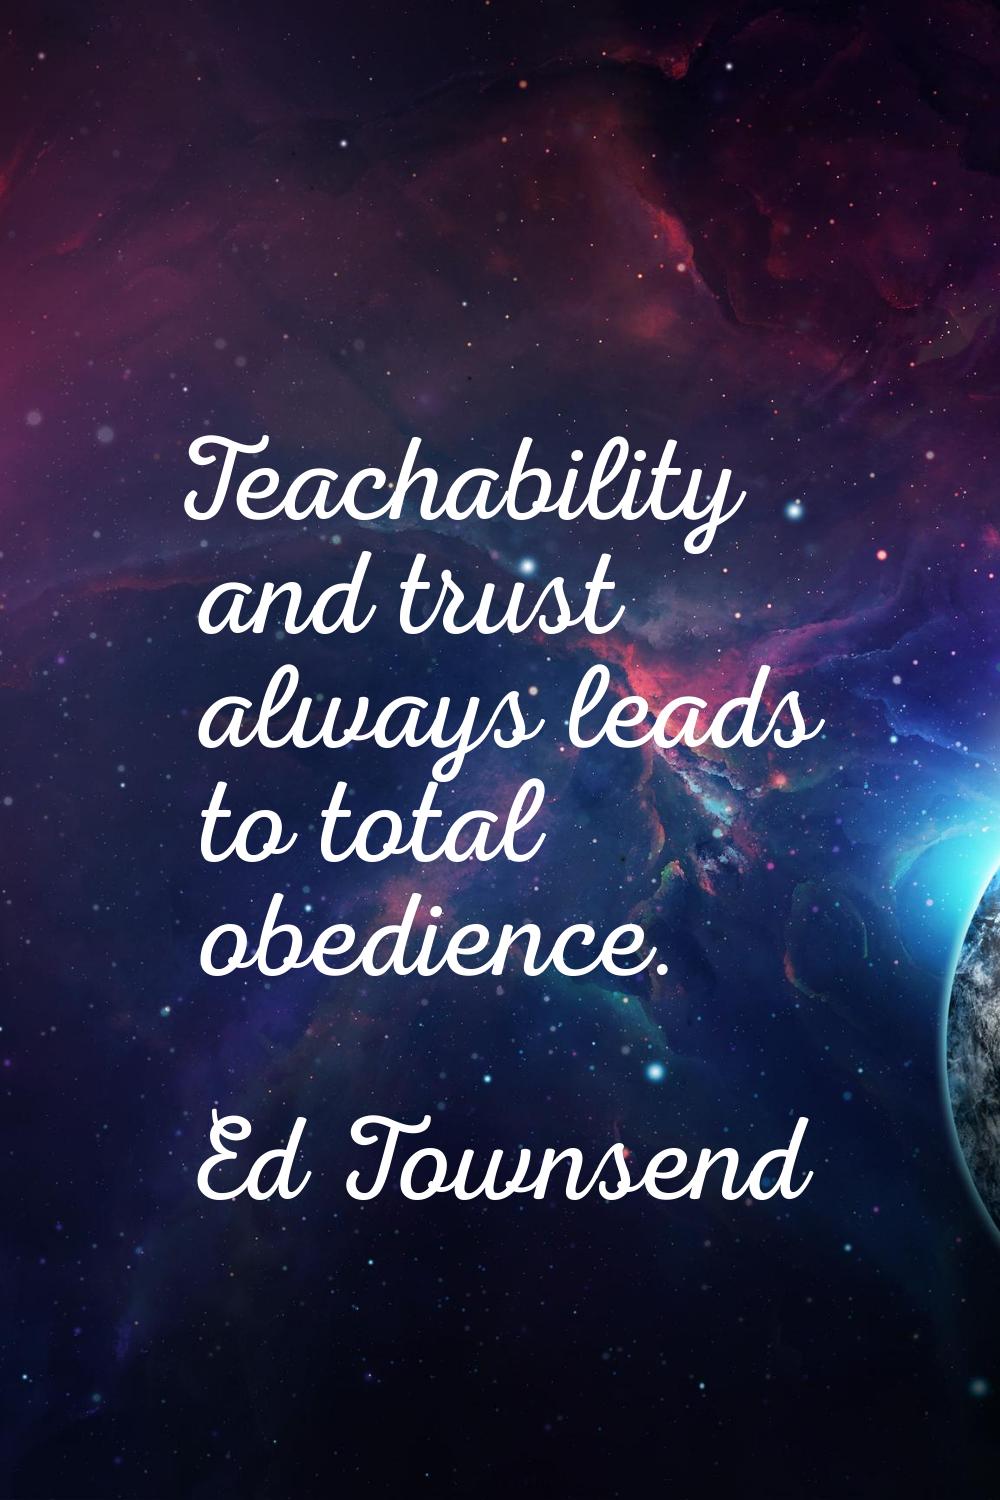 Teachability and trust always leads to total obedience.